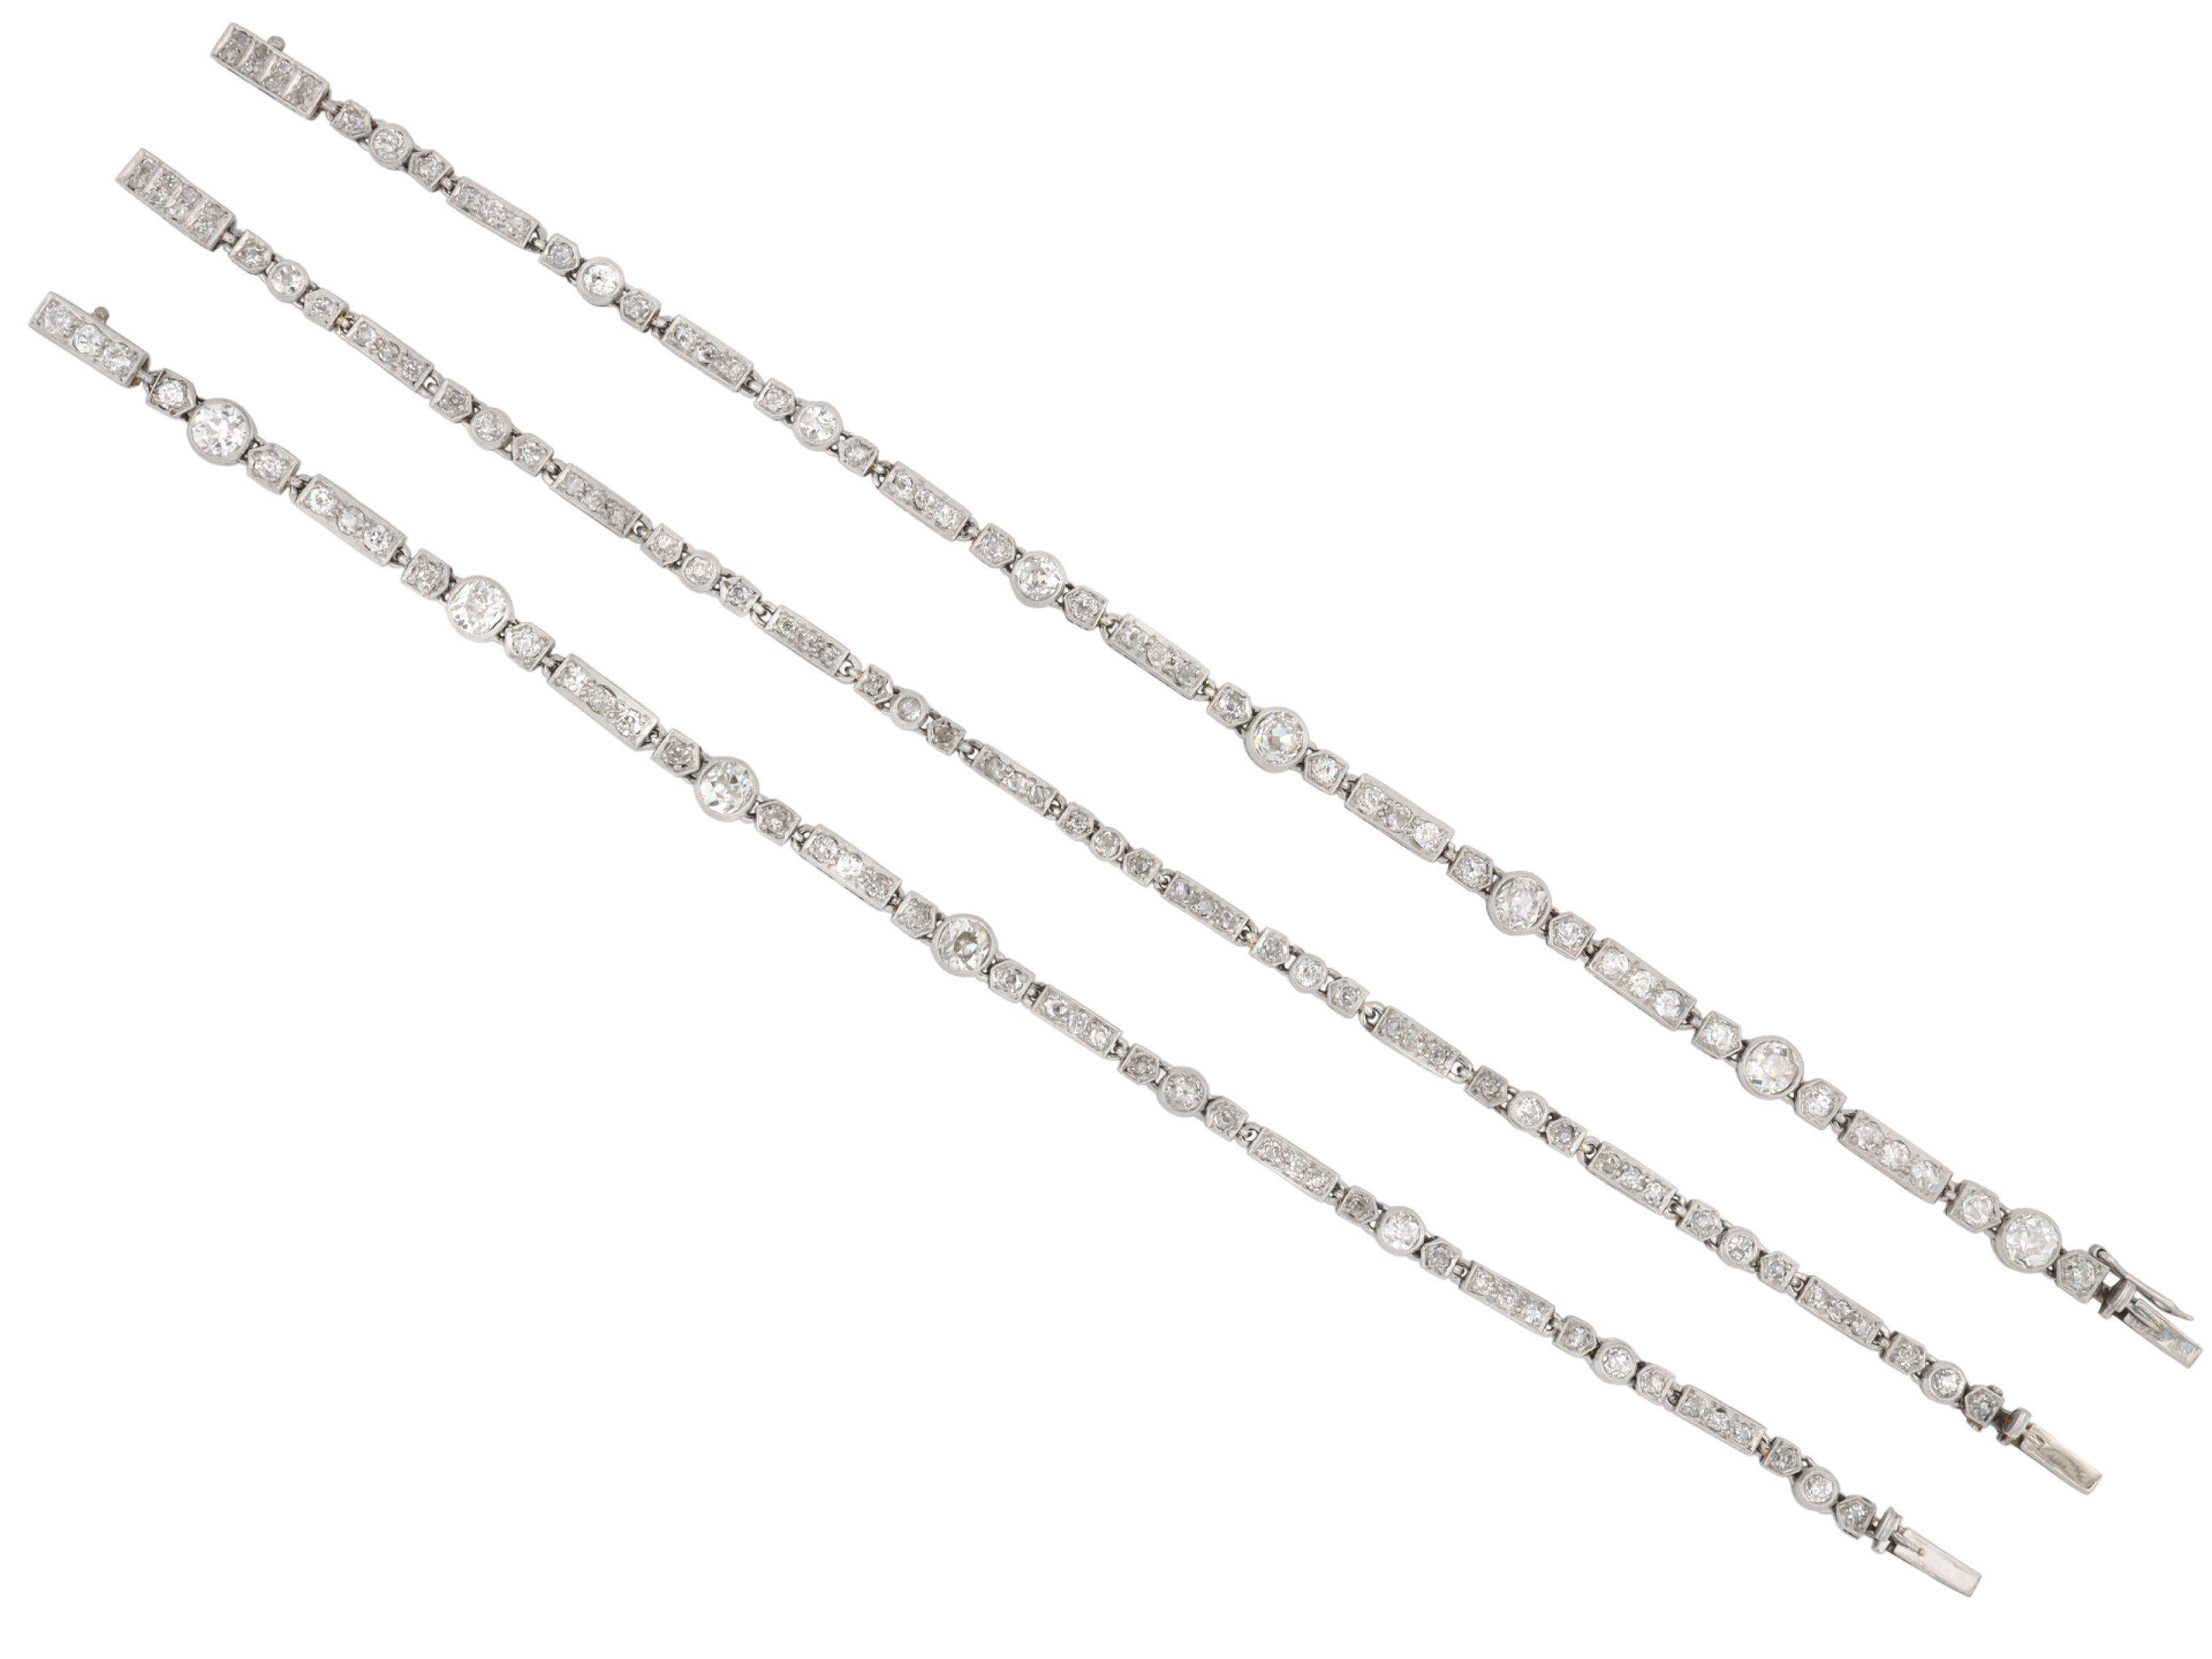 Convertible diamond necklace/bracelet. Set with twenty-five cushion shape old mine diamonds in open back rubover settings with a combined approximate weight of 4.30 carats, further set with one hundred and thirty-five mixed round old cut diamonds in